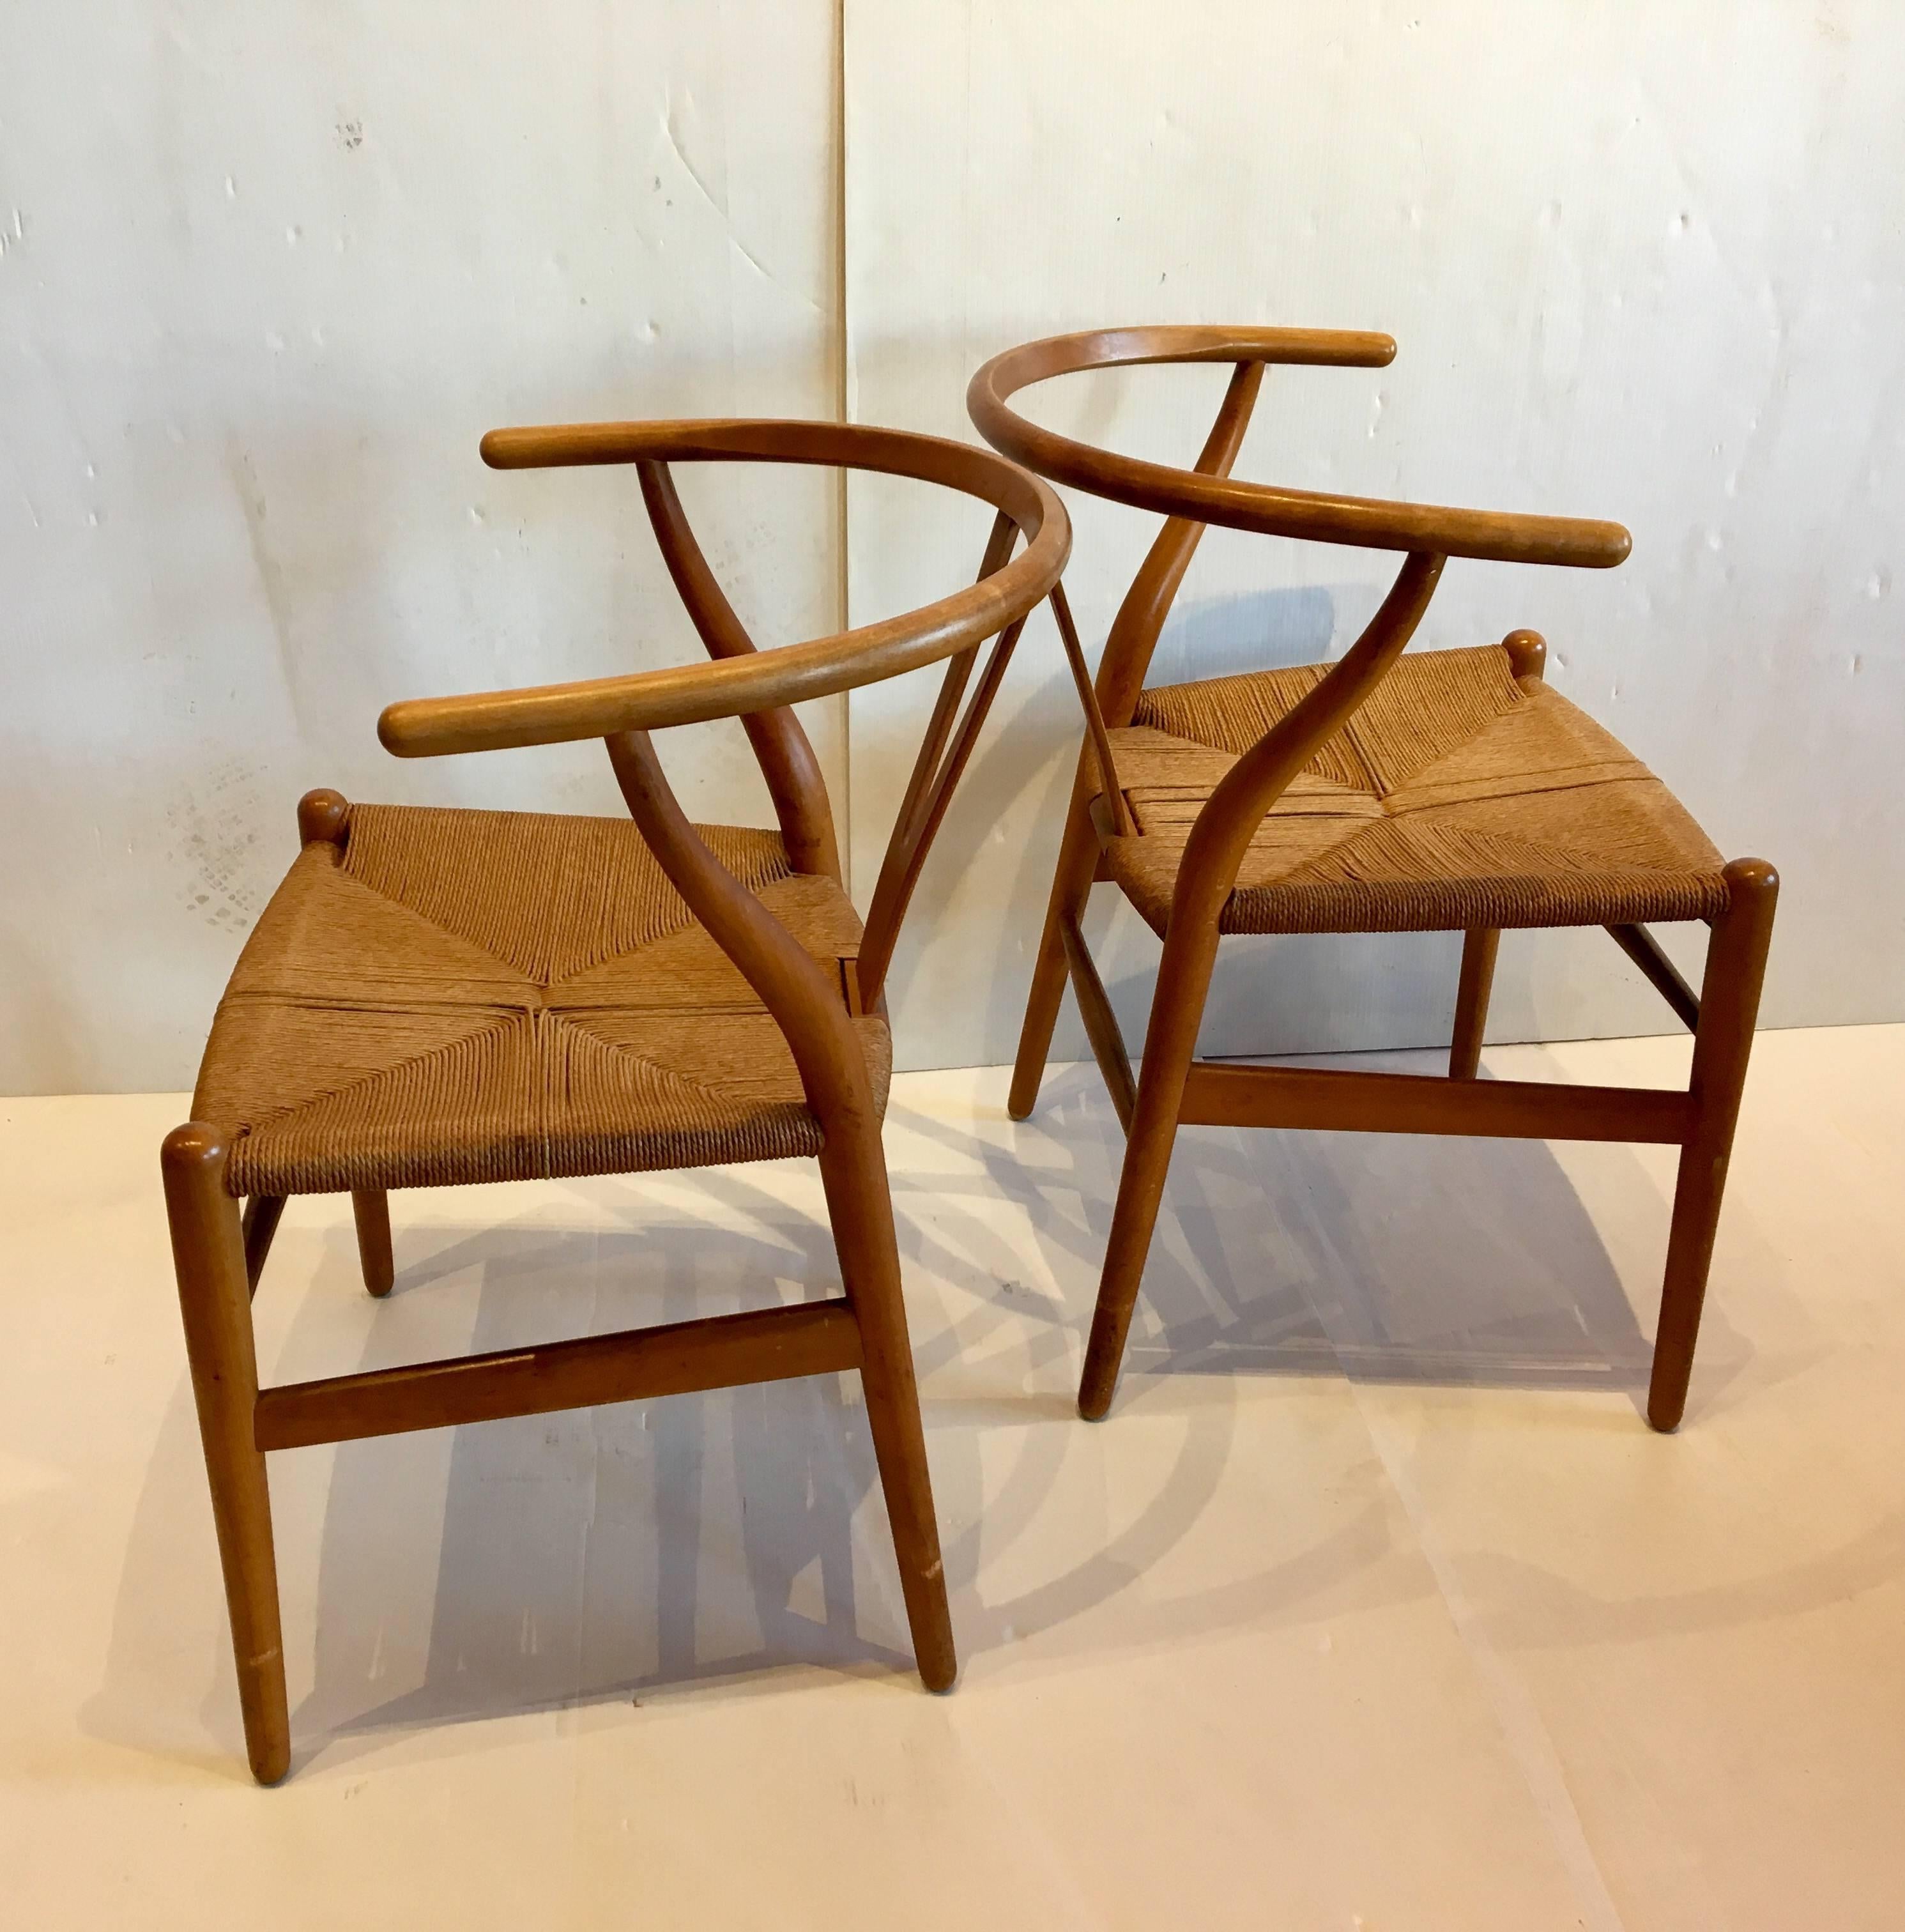 Nice pair of Wishbone chairs design by Hans Wegner with original rope seats. Great condition in birchwood finish with a walnut stain.